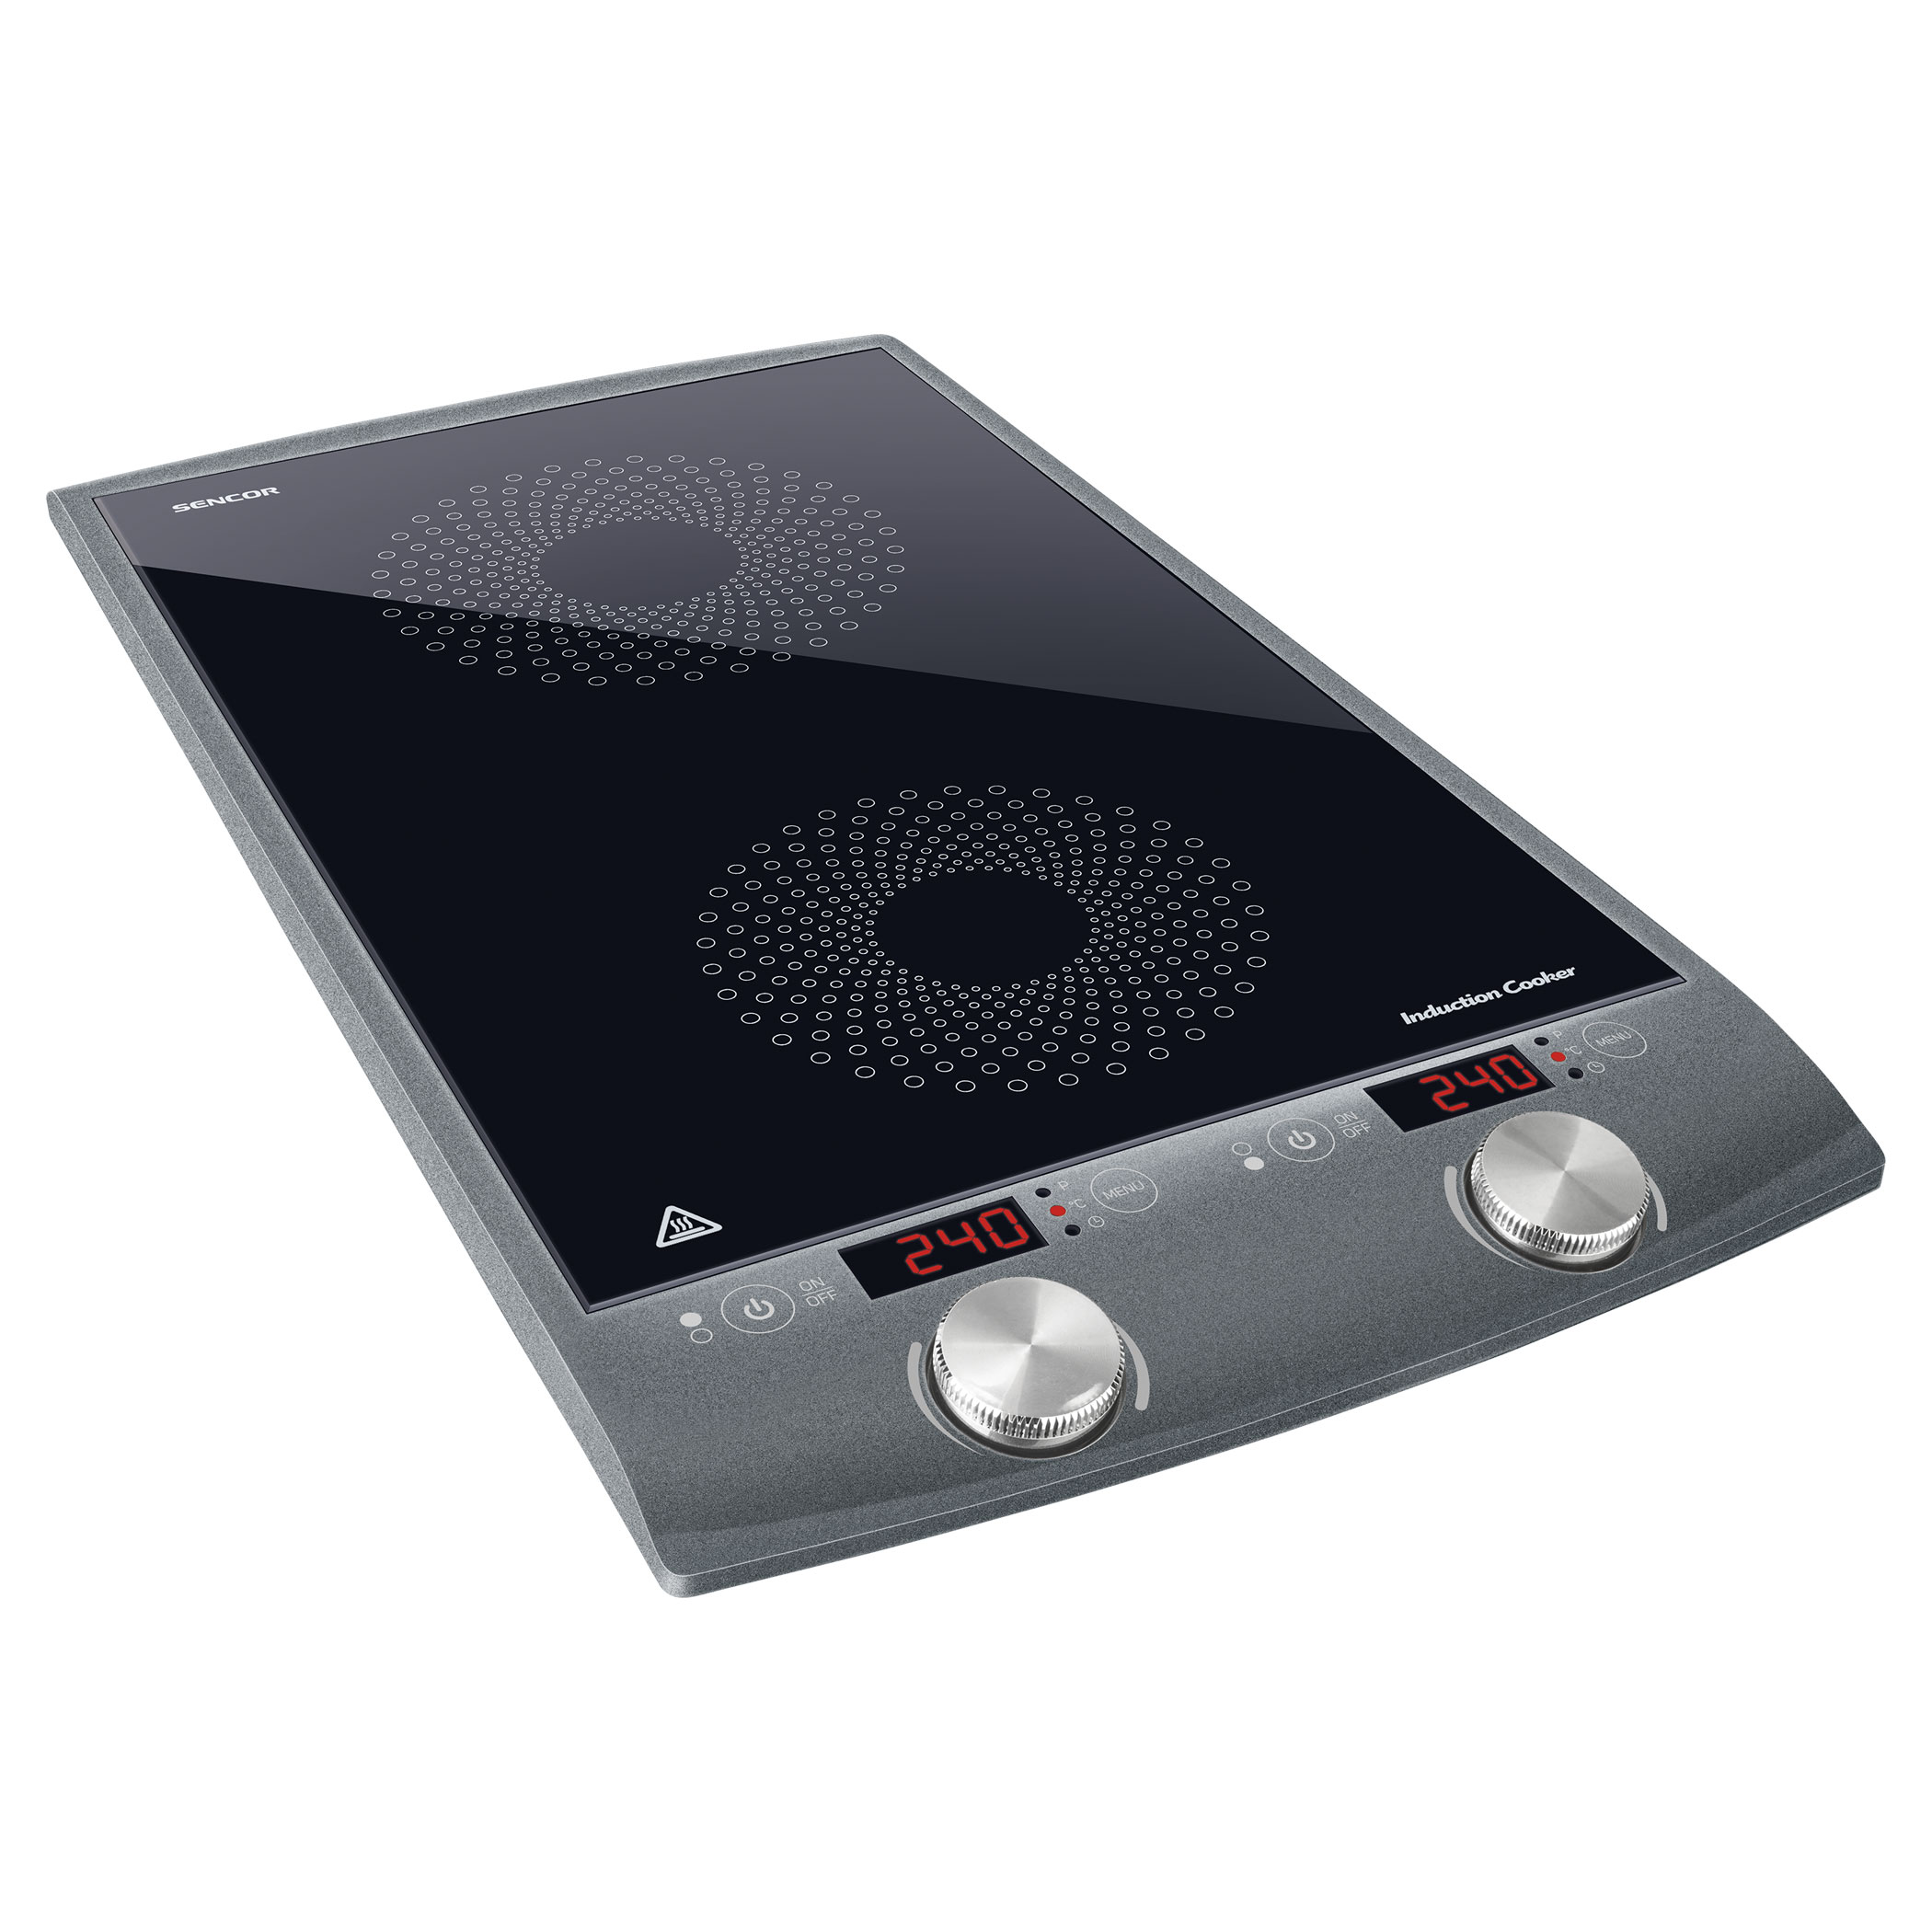 Temperature Control 60-240 °C in 20 °C Steps 2900 W Diameter 145 and 167 mm Sencor SCP 4202GY Double-Sided Induction Hob 